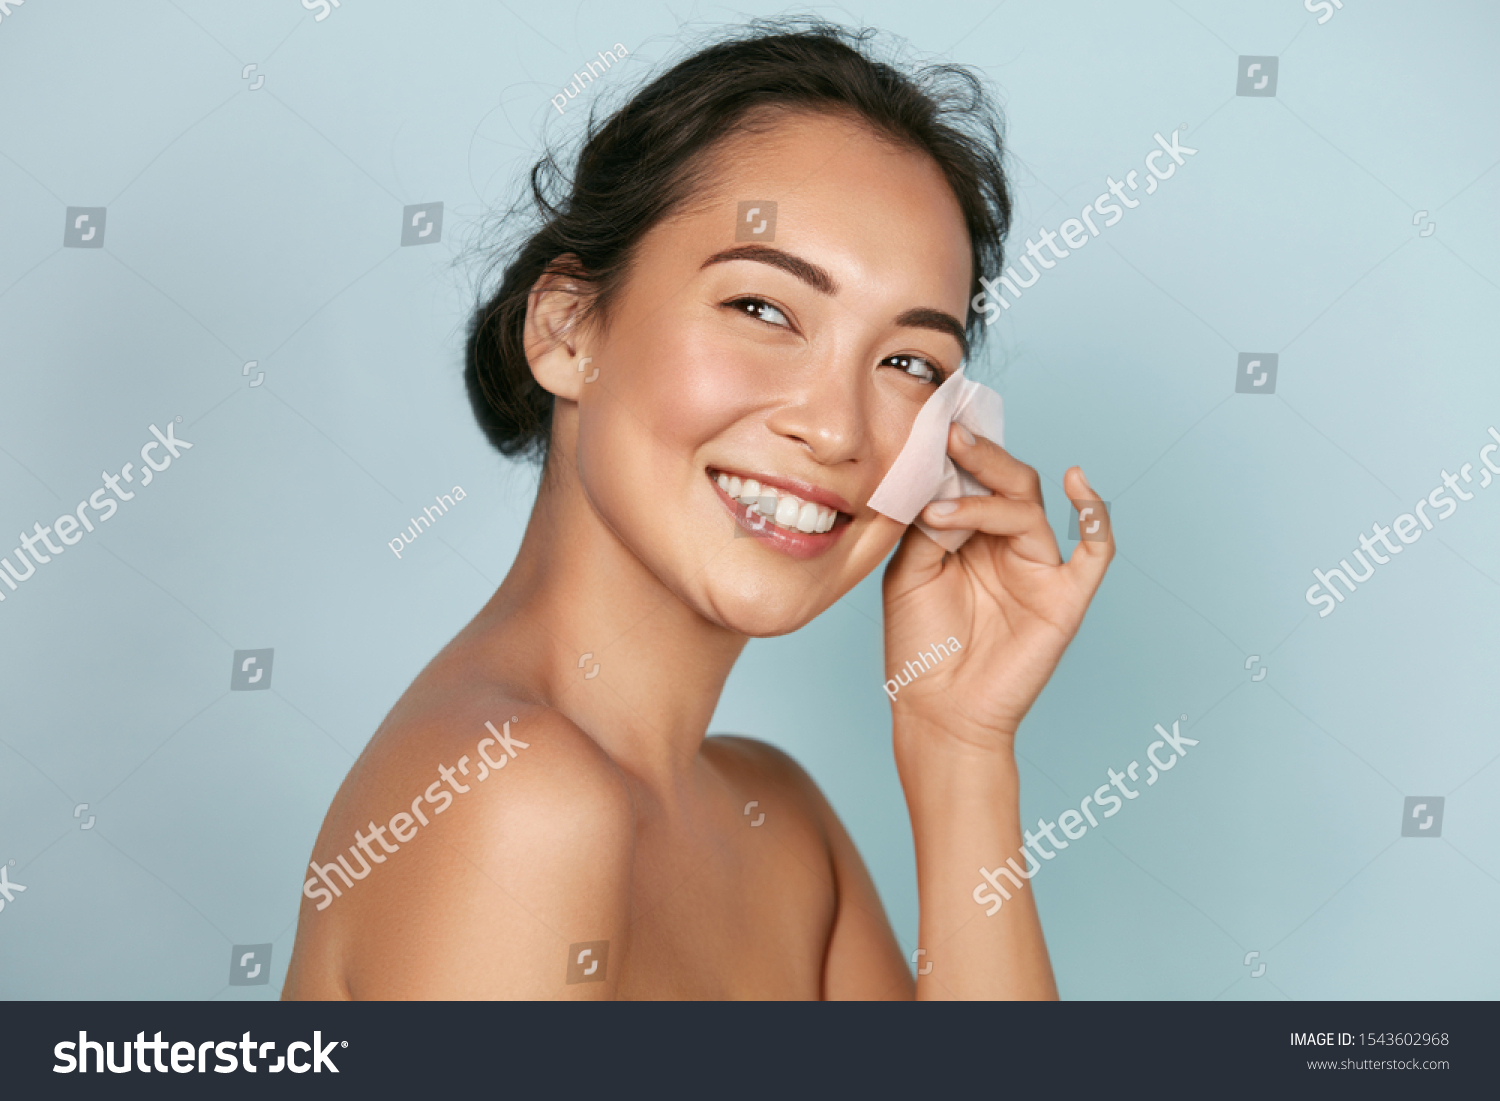 Face skin care. Smiling woman using facial oil blotting paper portrait. Closeup of beautiful happy asian girl model with natural makeup using oil absorbing sheets, beauty product at studio #1543602968